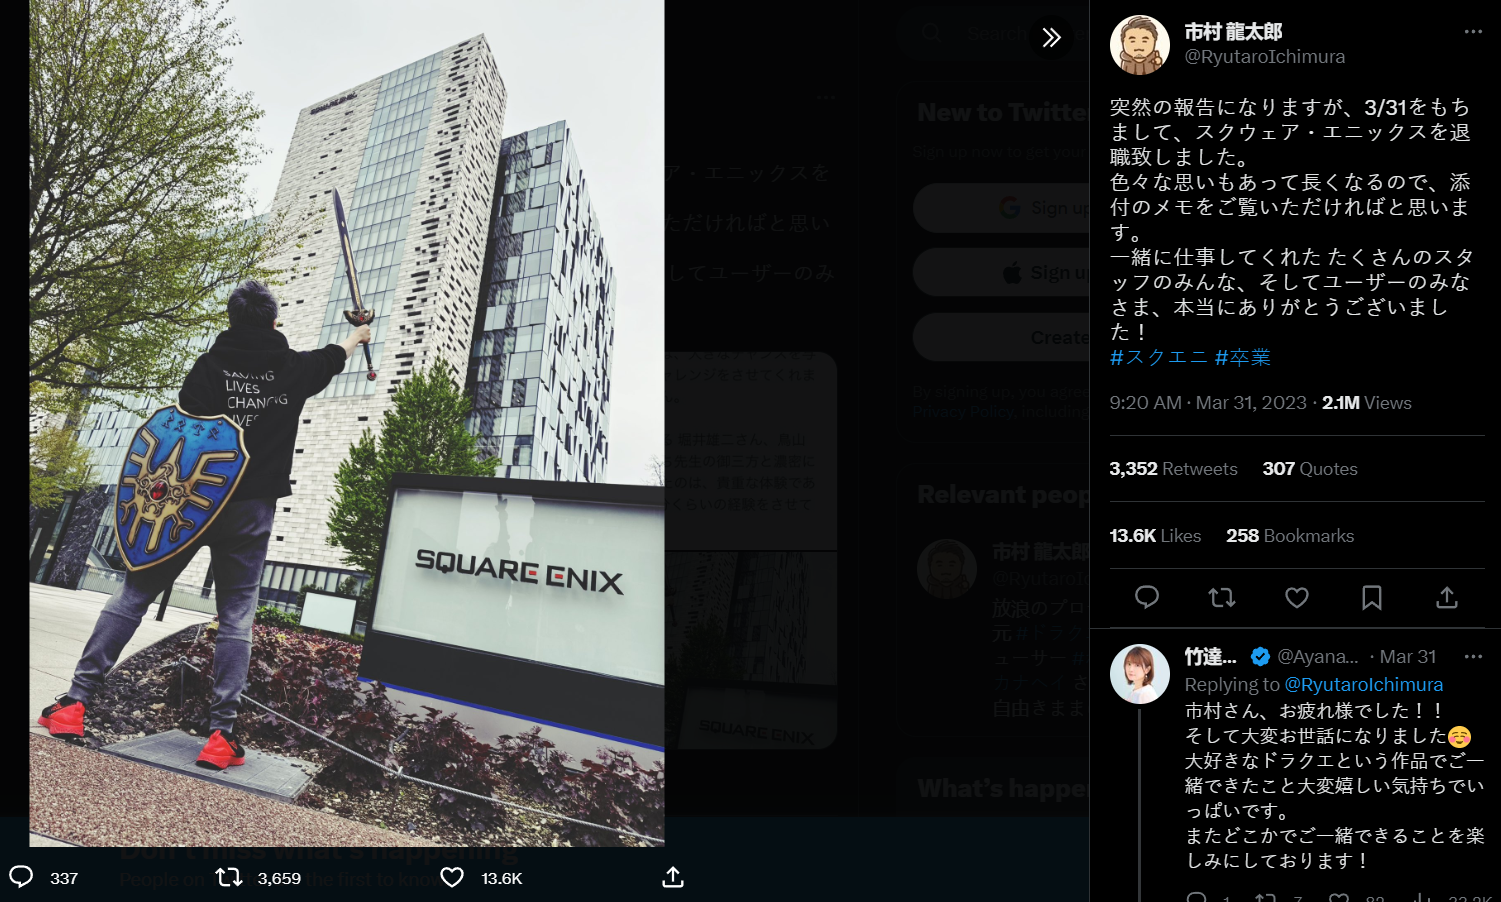 Ryutaro Ichimura poses with Erdrick's sword and shield outside Square Enix' offices via Twitter